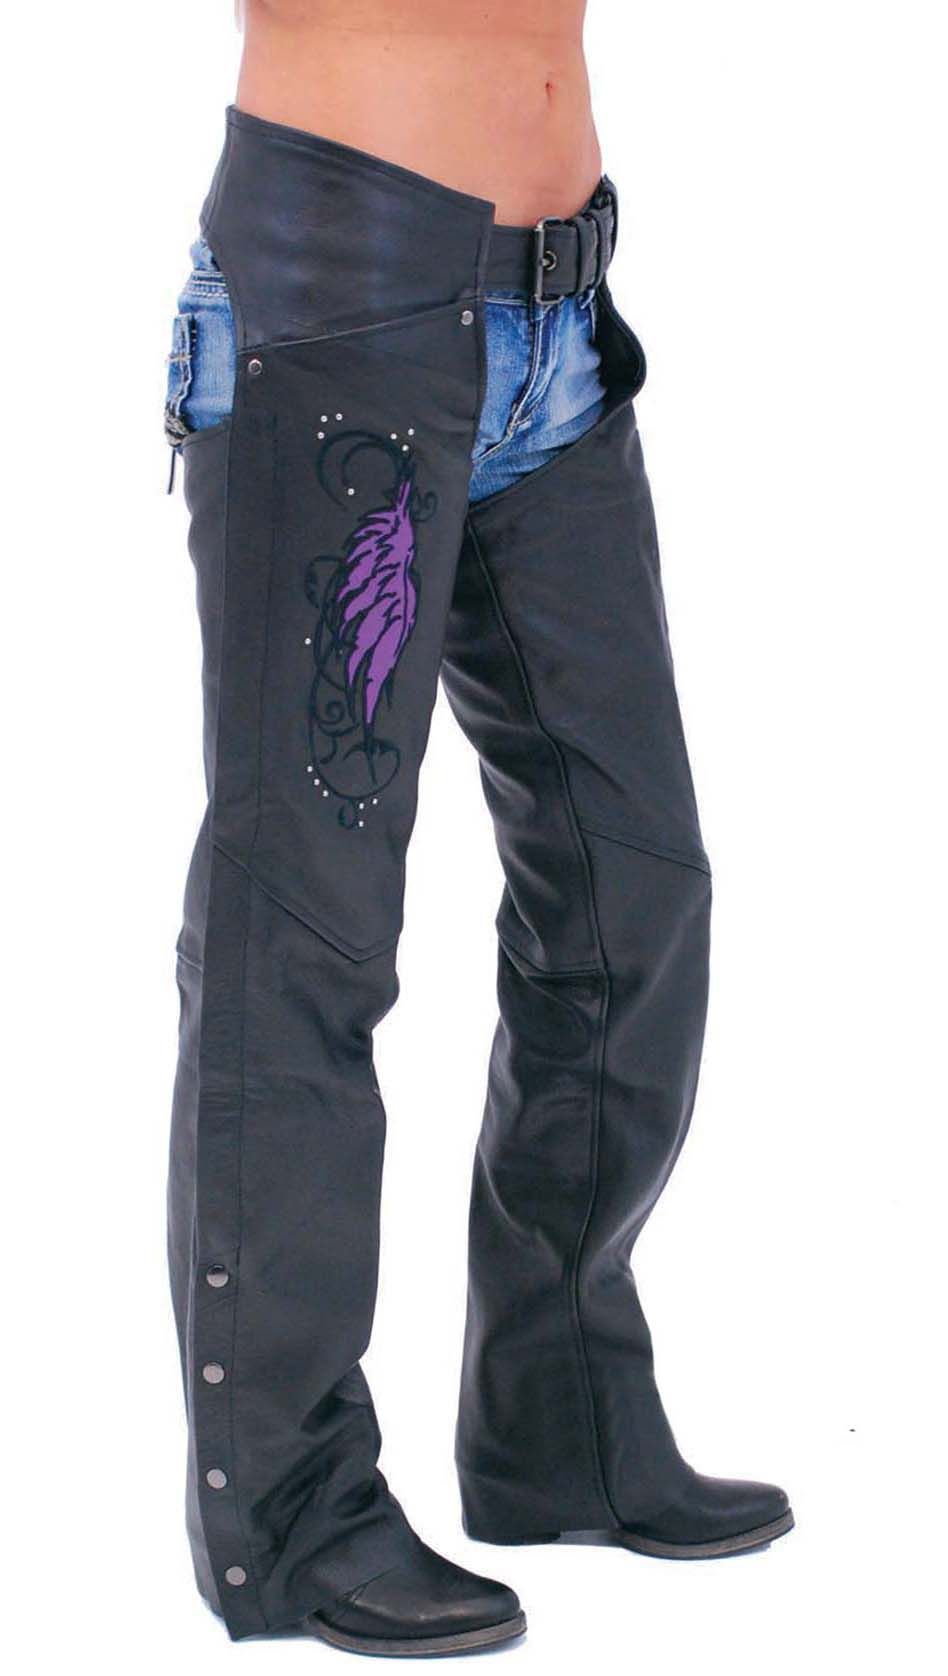 lady biker wearing black leather chaps with purple wings on the leg